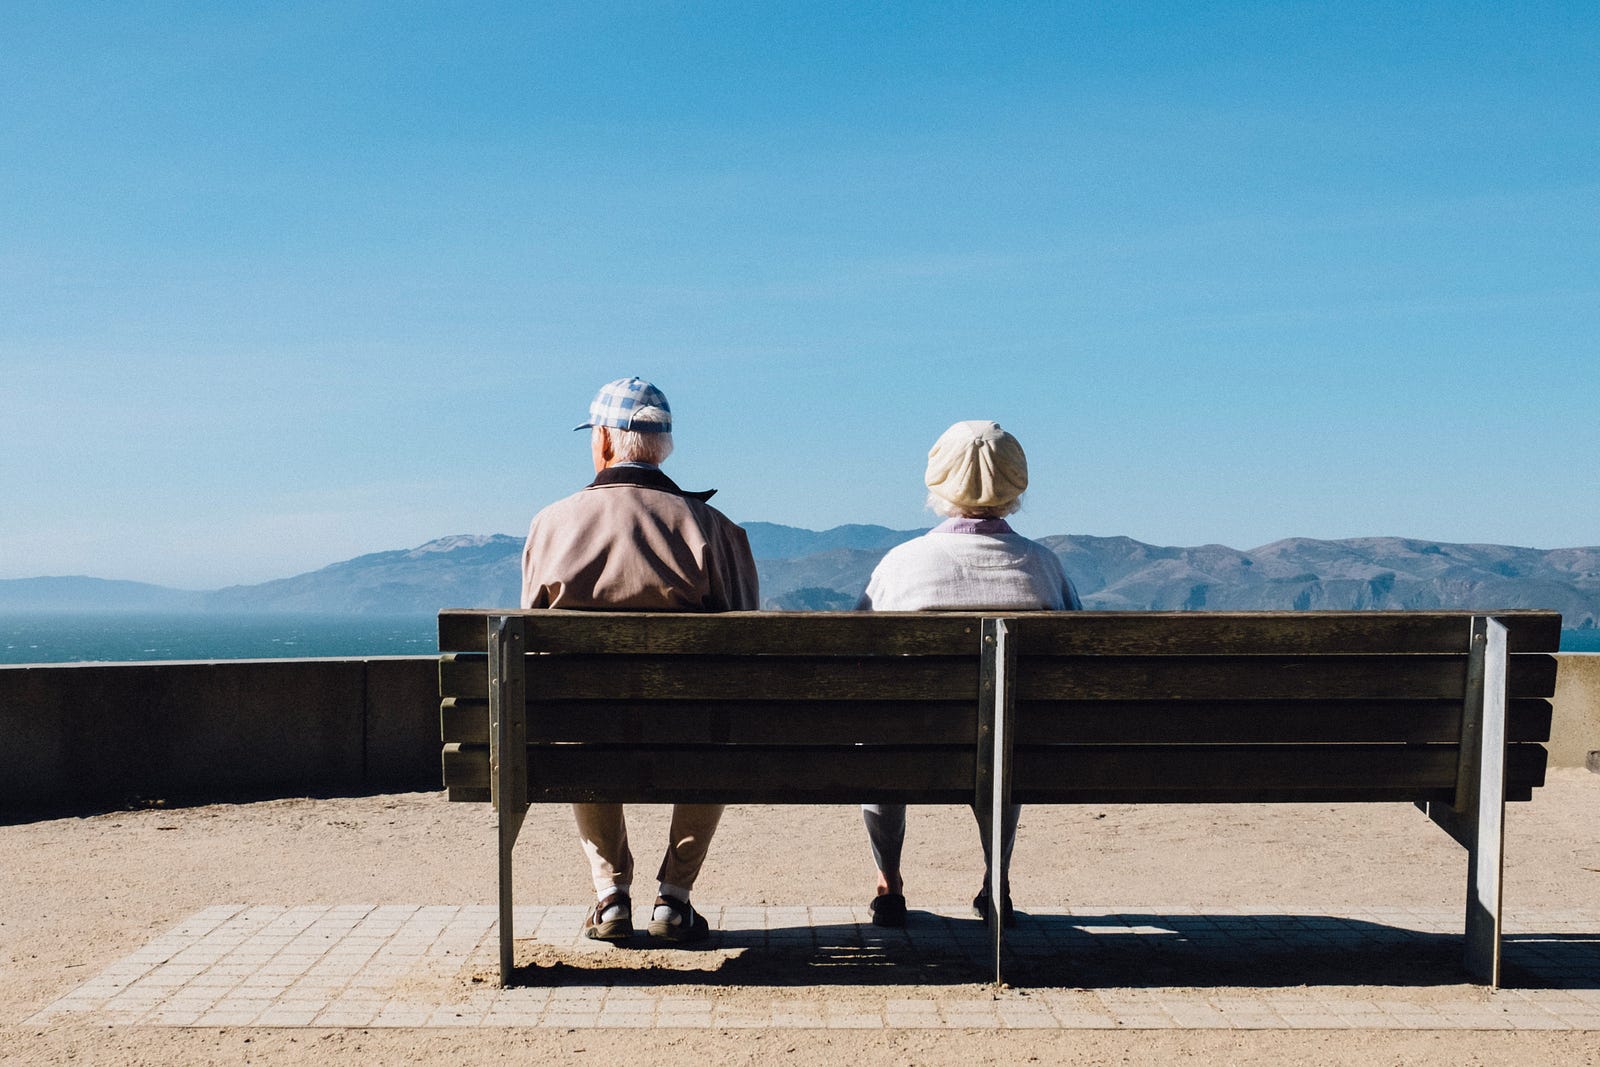 An older couple sits on a bench. We see them from behind as they look at mountains in the distance. Colorectal screening should continue until age 75, according to the U.S. Preventative Services Task Force, after which it depends on the individual patient and their doctor until age 85.